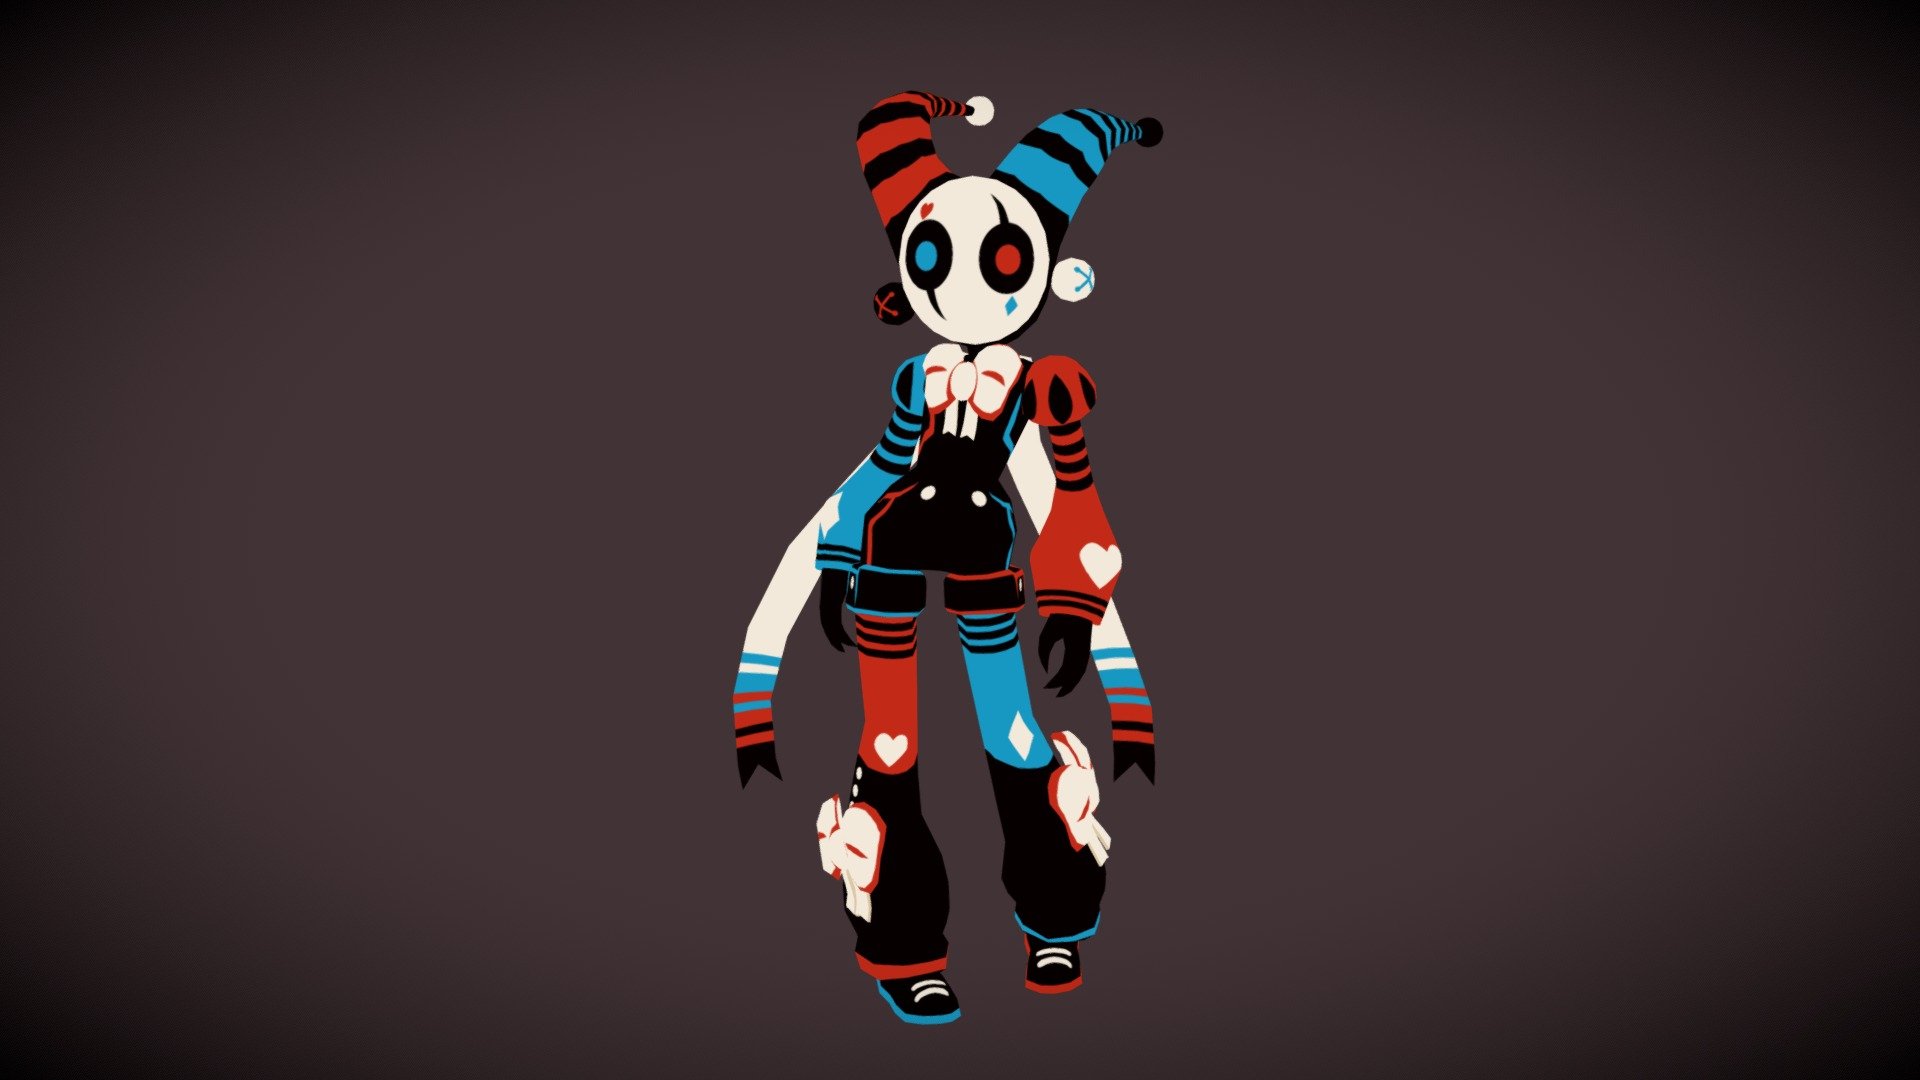 I modelled Kadabura's Jester character. I really liked what she does, so here it is, in 3D.
I tried to keep the 2D feel, so no light work or post effects. Keep it simple.

you can find the original piece here:
https://www.kadaburadraws.com/lineless#/jester/
of course, i dont own the character design and original art yadayada. Made it for fun and practice. :-)

Thanks for watching! - KadaBura Jester - 3D model by PapaGodzilla (@samholy) 3d model